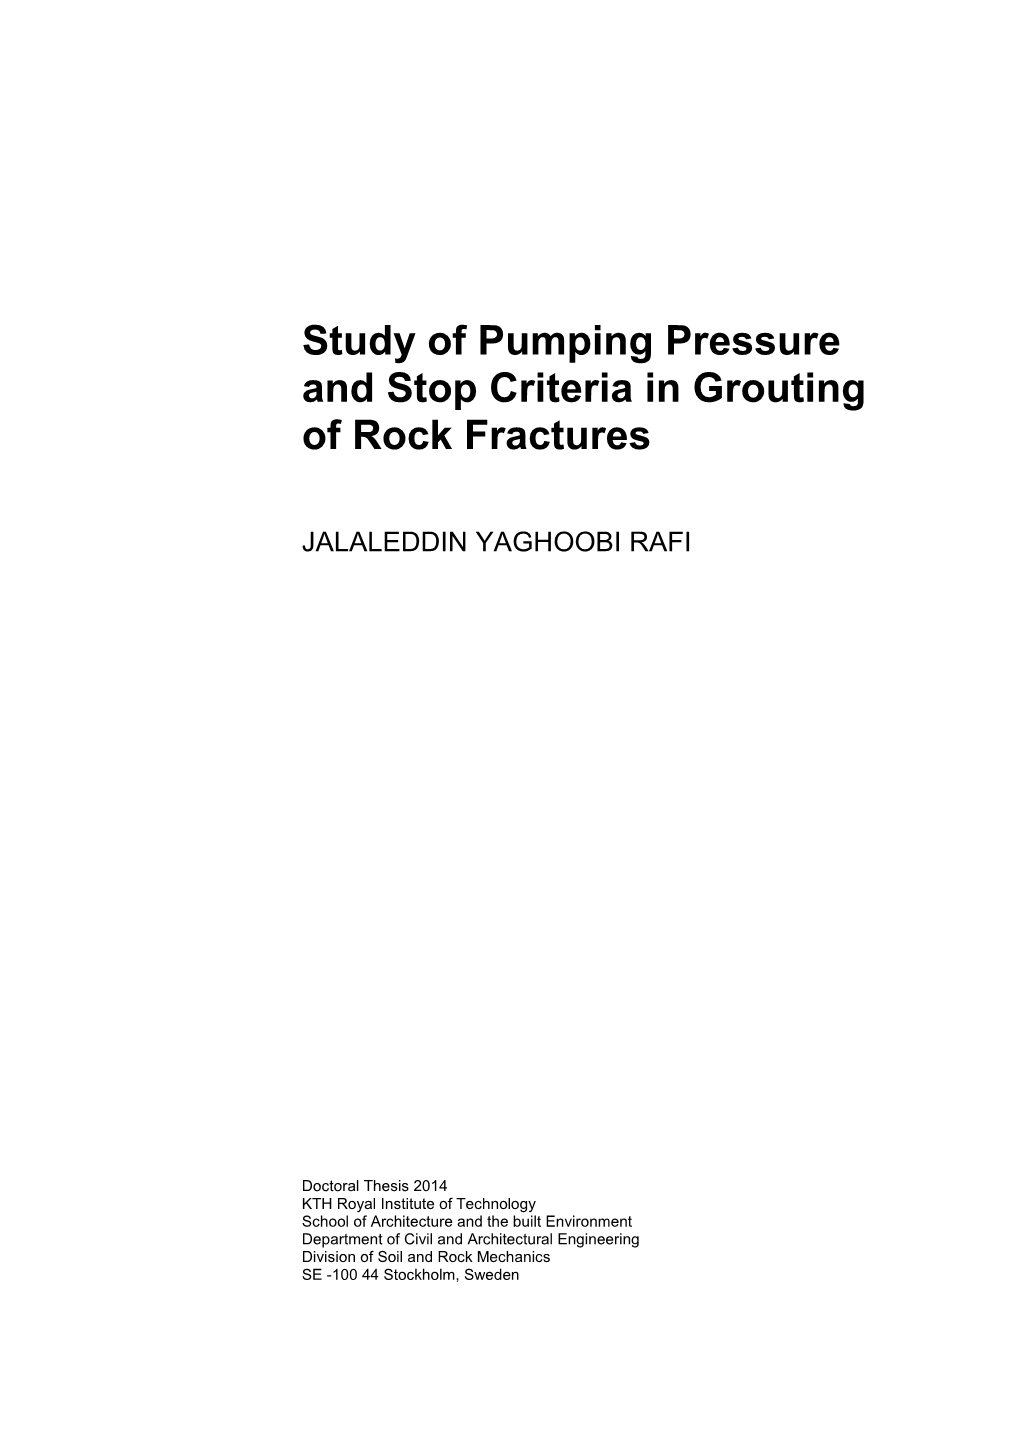 Study of Pumping Pressure and Stop Criteria in Grouting of Rock Fractures